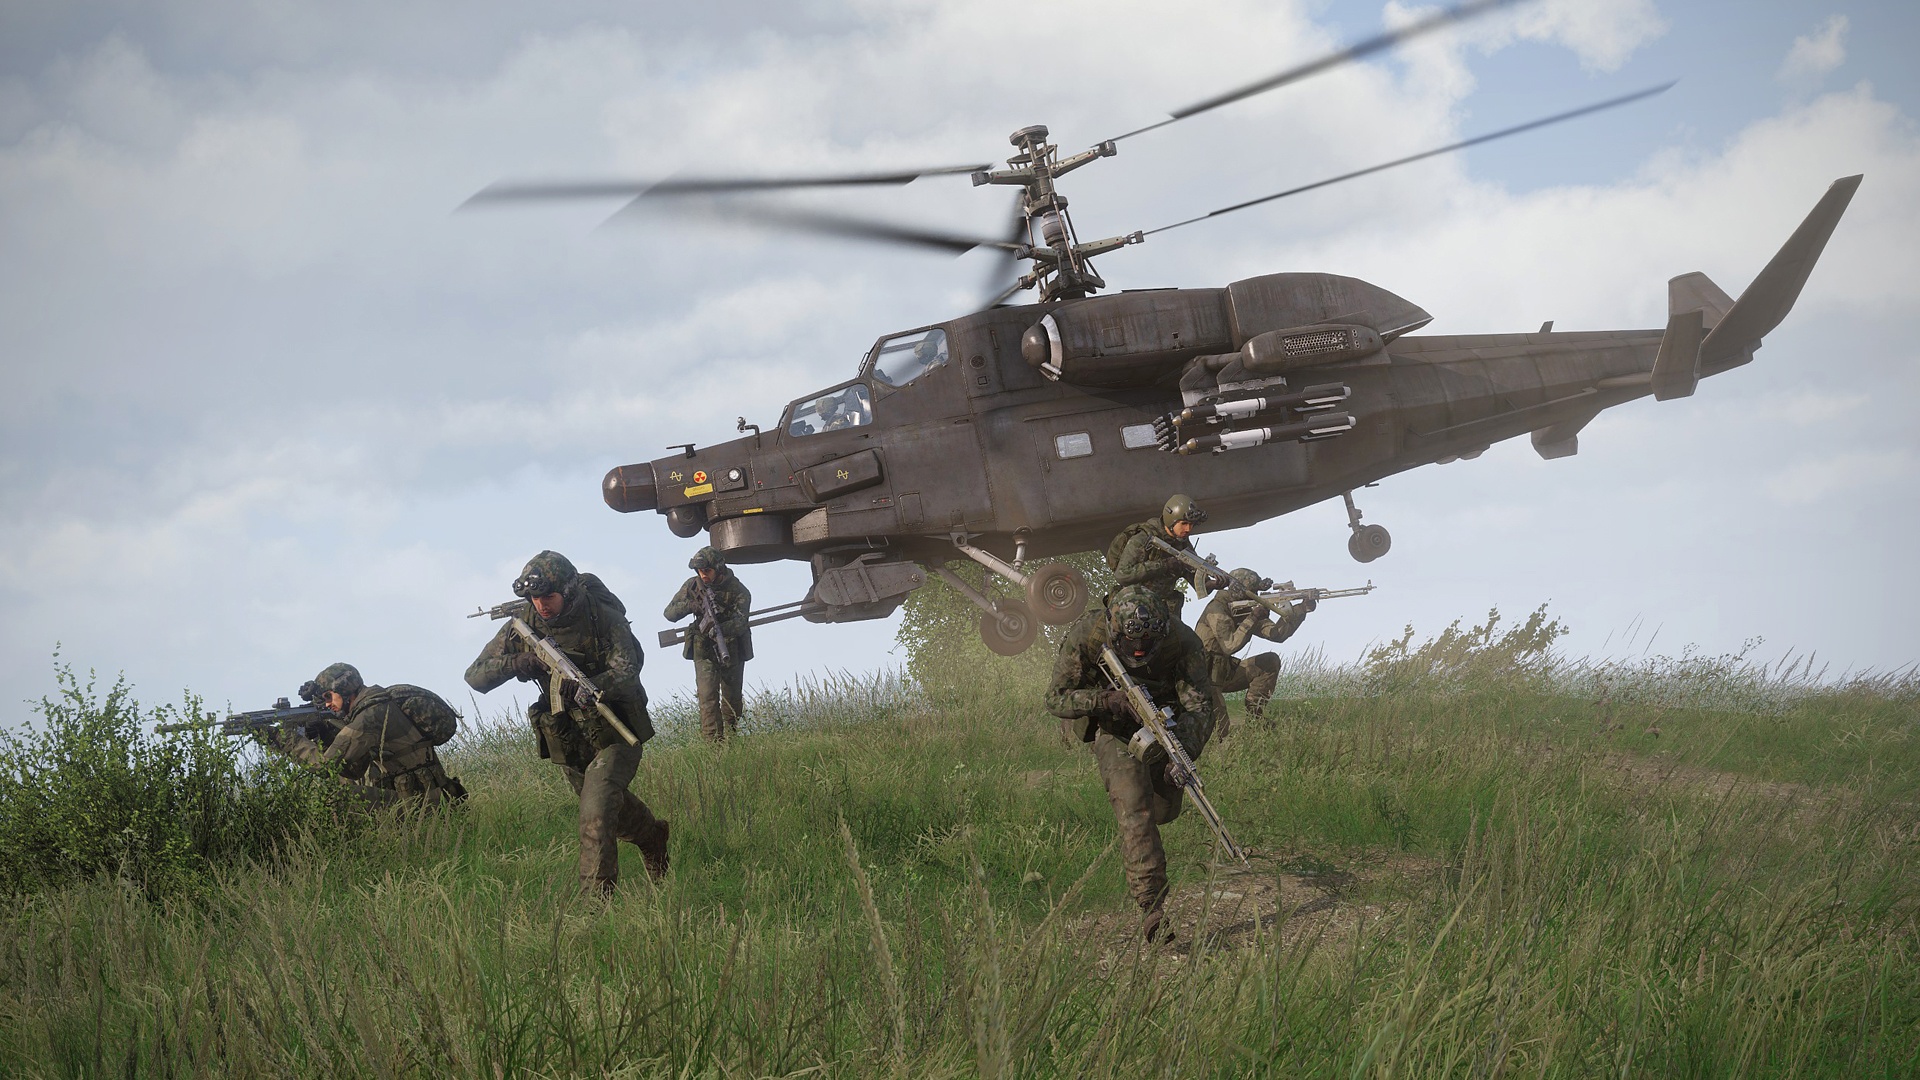 Helicopter will not land and load troops in multiplayer - ARMA 3 - MISSION  EDITING & SCRIPTING - Bohemia Interactive Forums